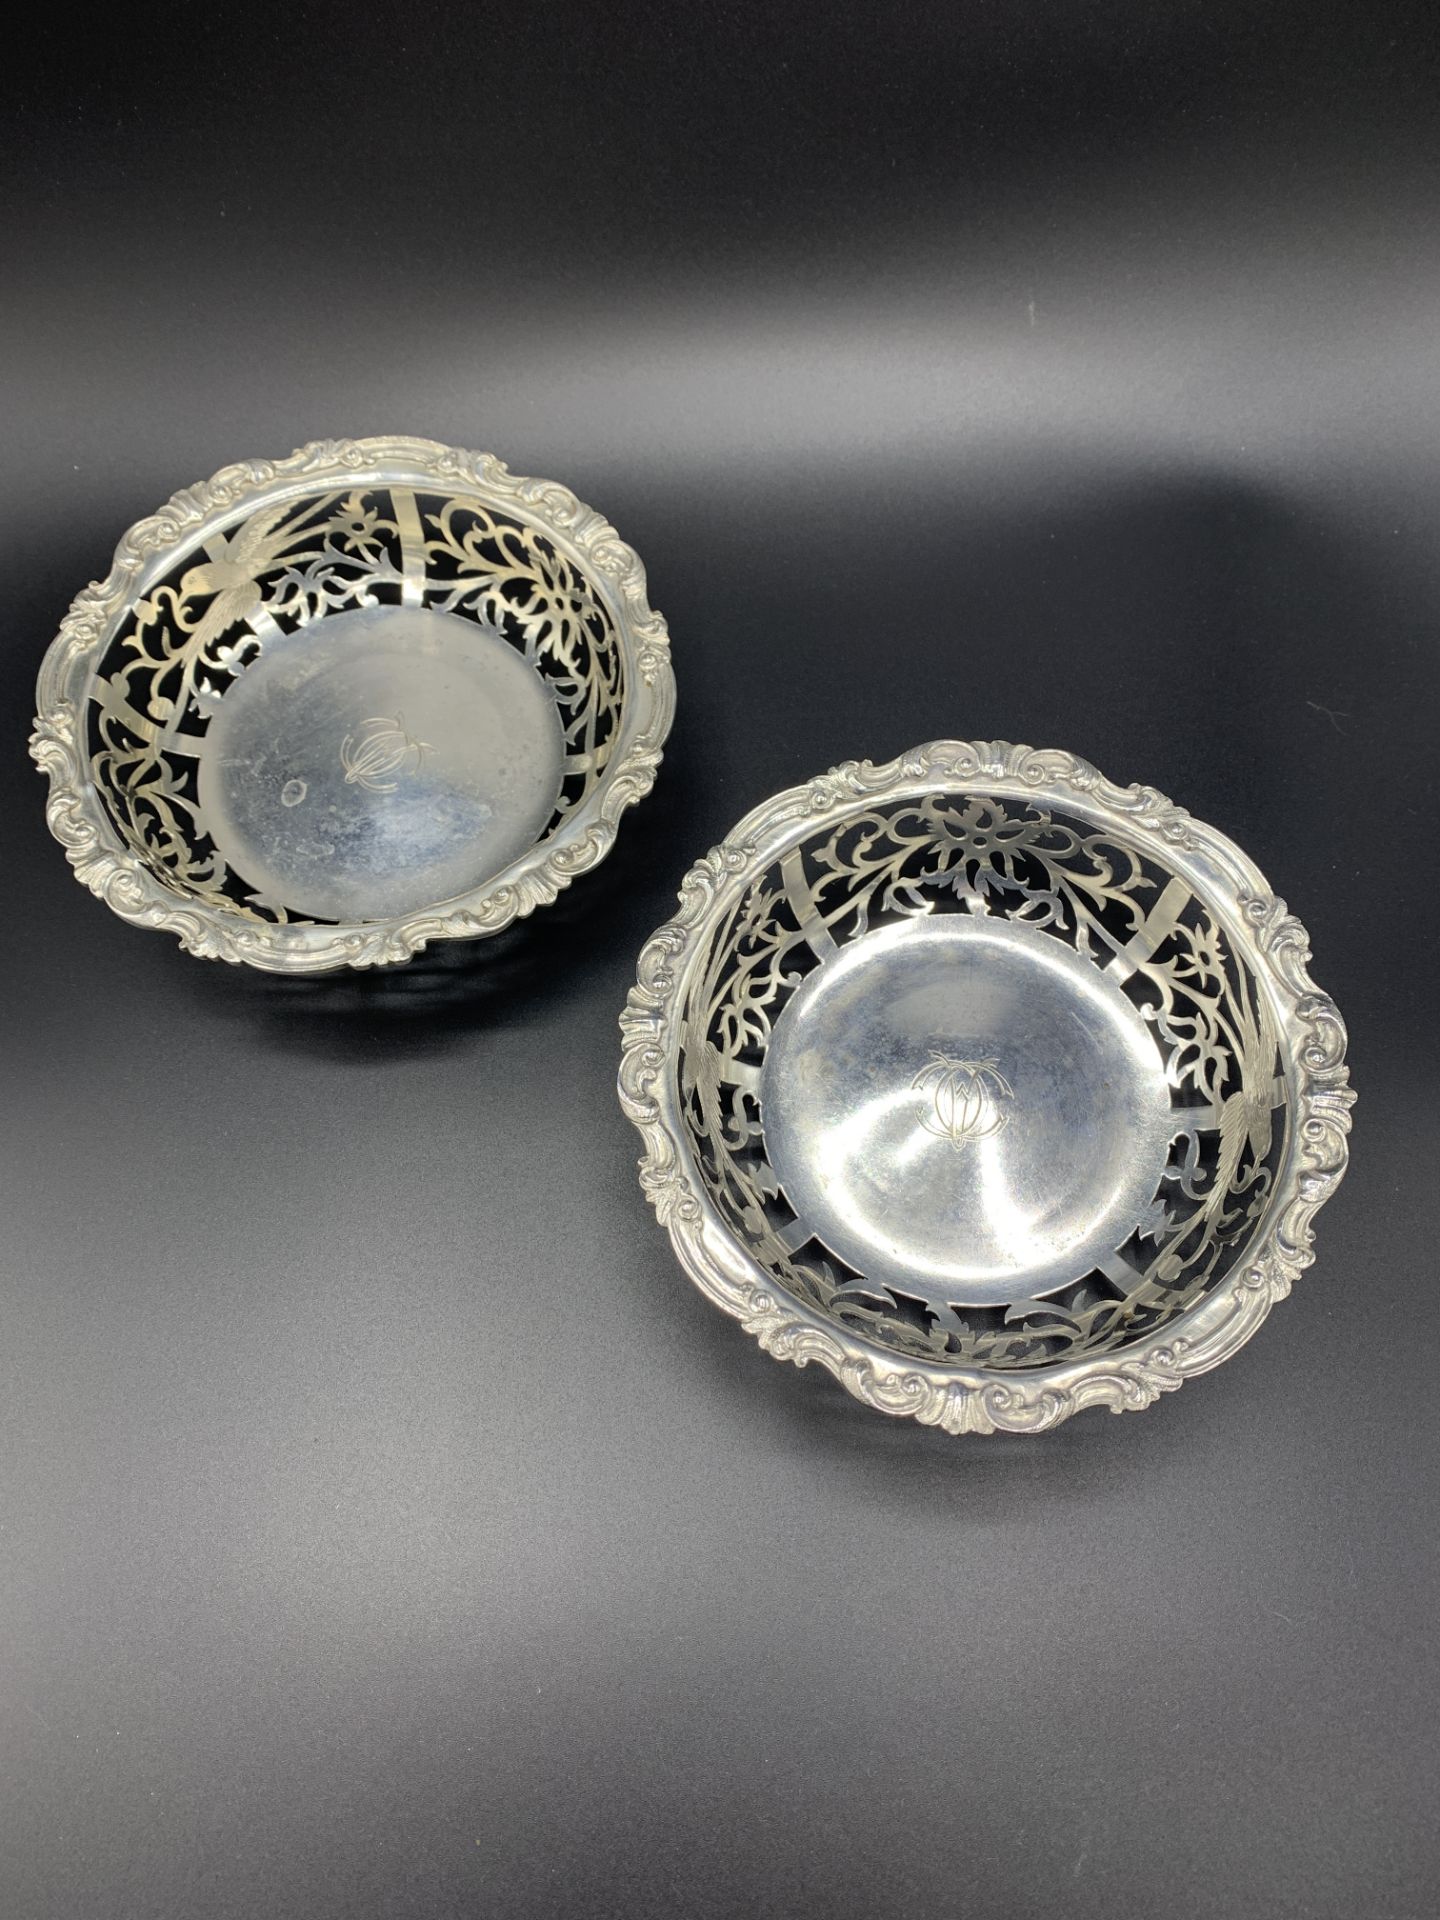 A pair of sterling silver bonbon dishes by Harry Brasted - Image 4 of 5